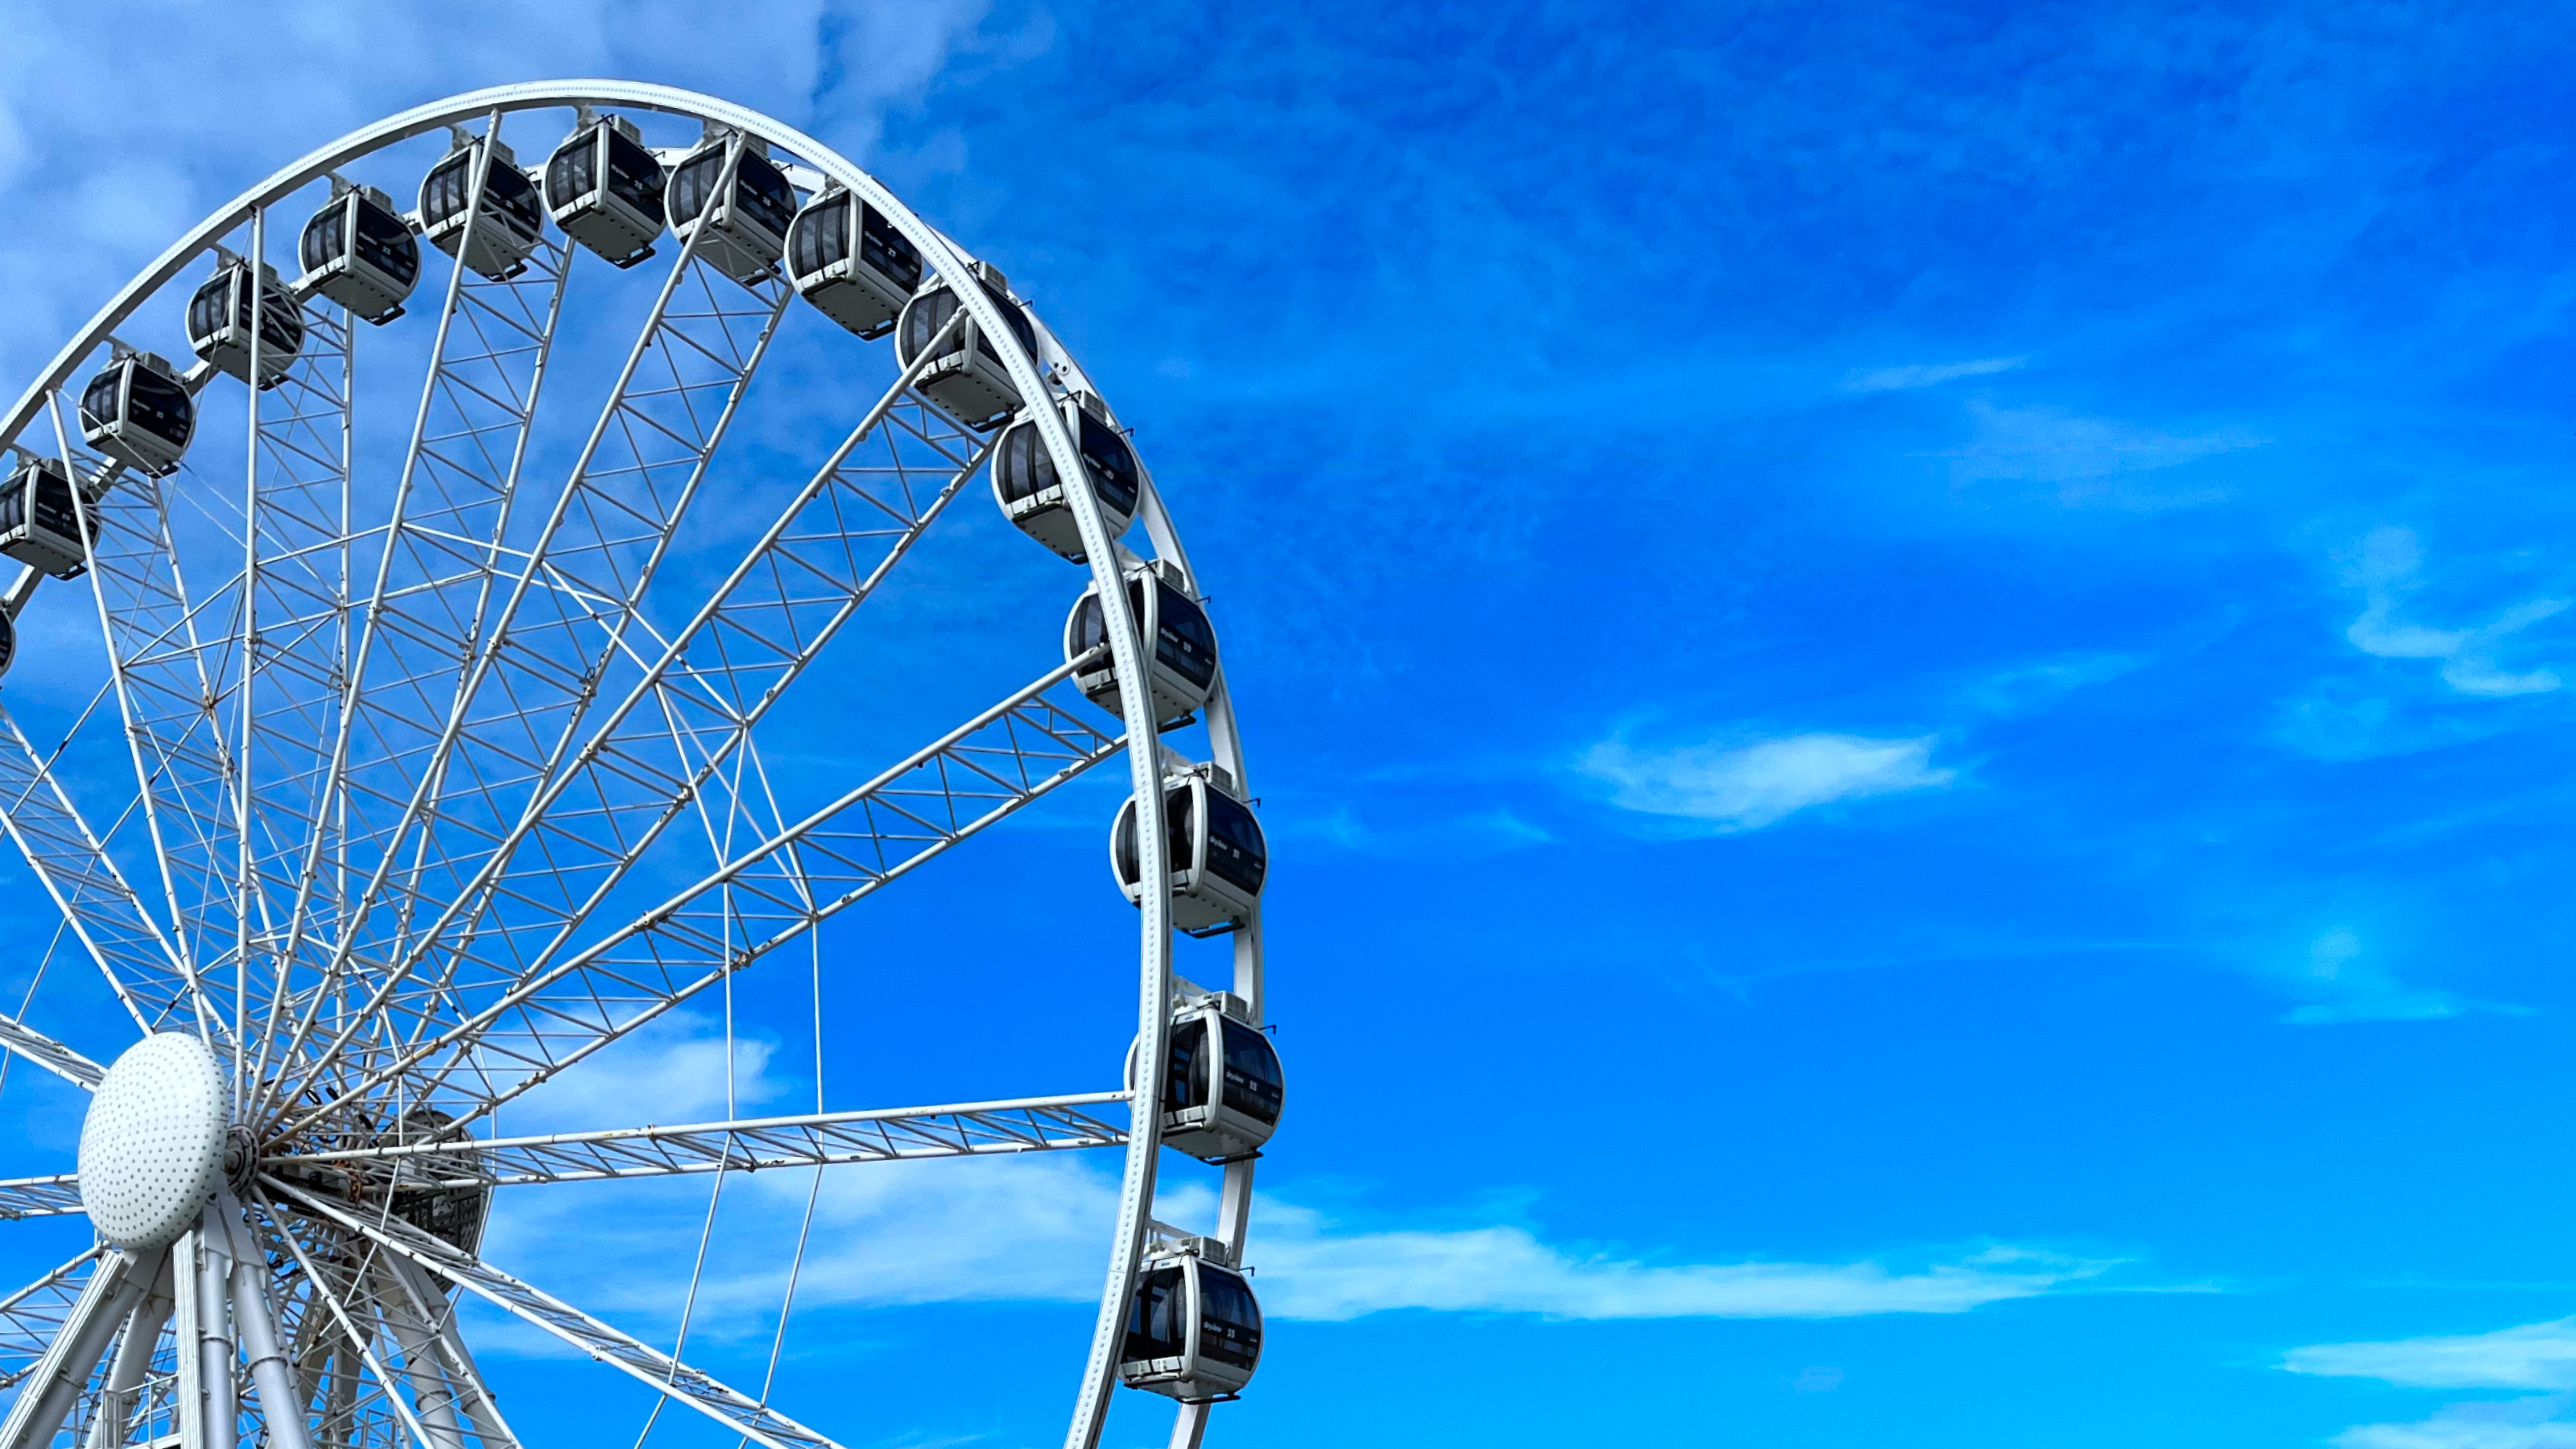 Large Ferris wheel against a bright blue sky at Scheveningen Pier, The Hague, with no visible people.